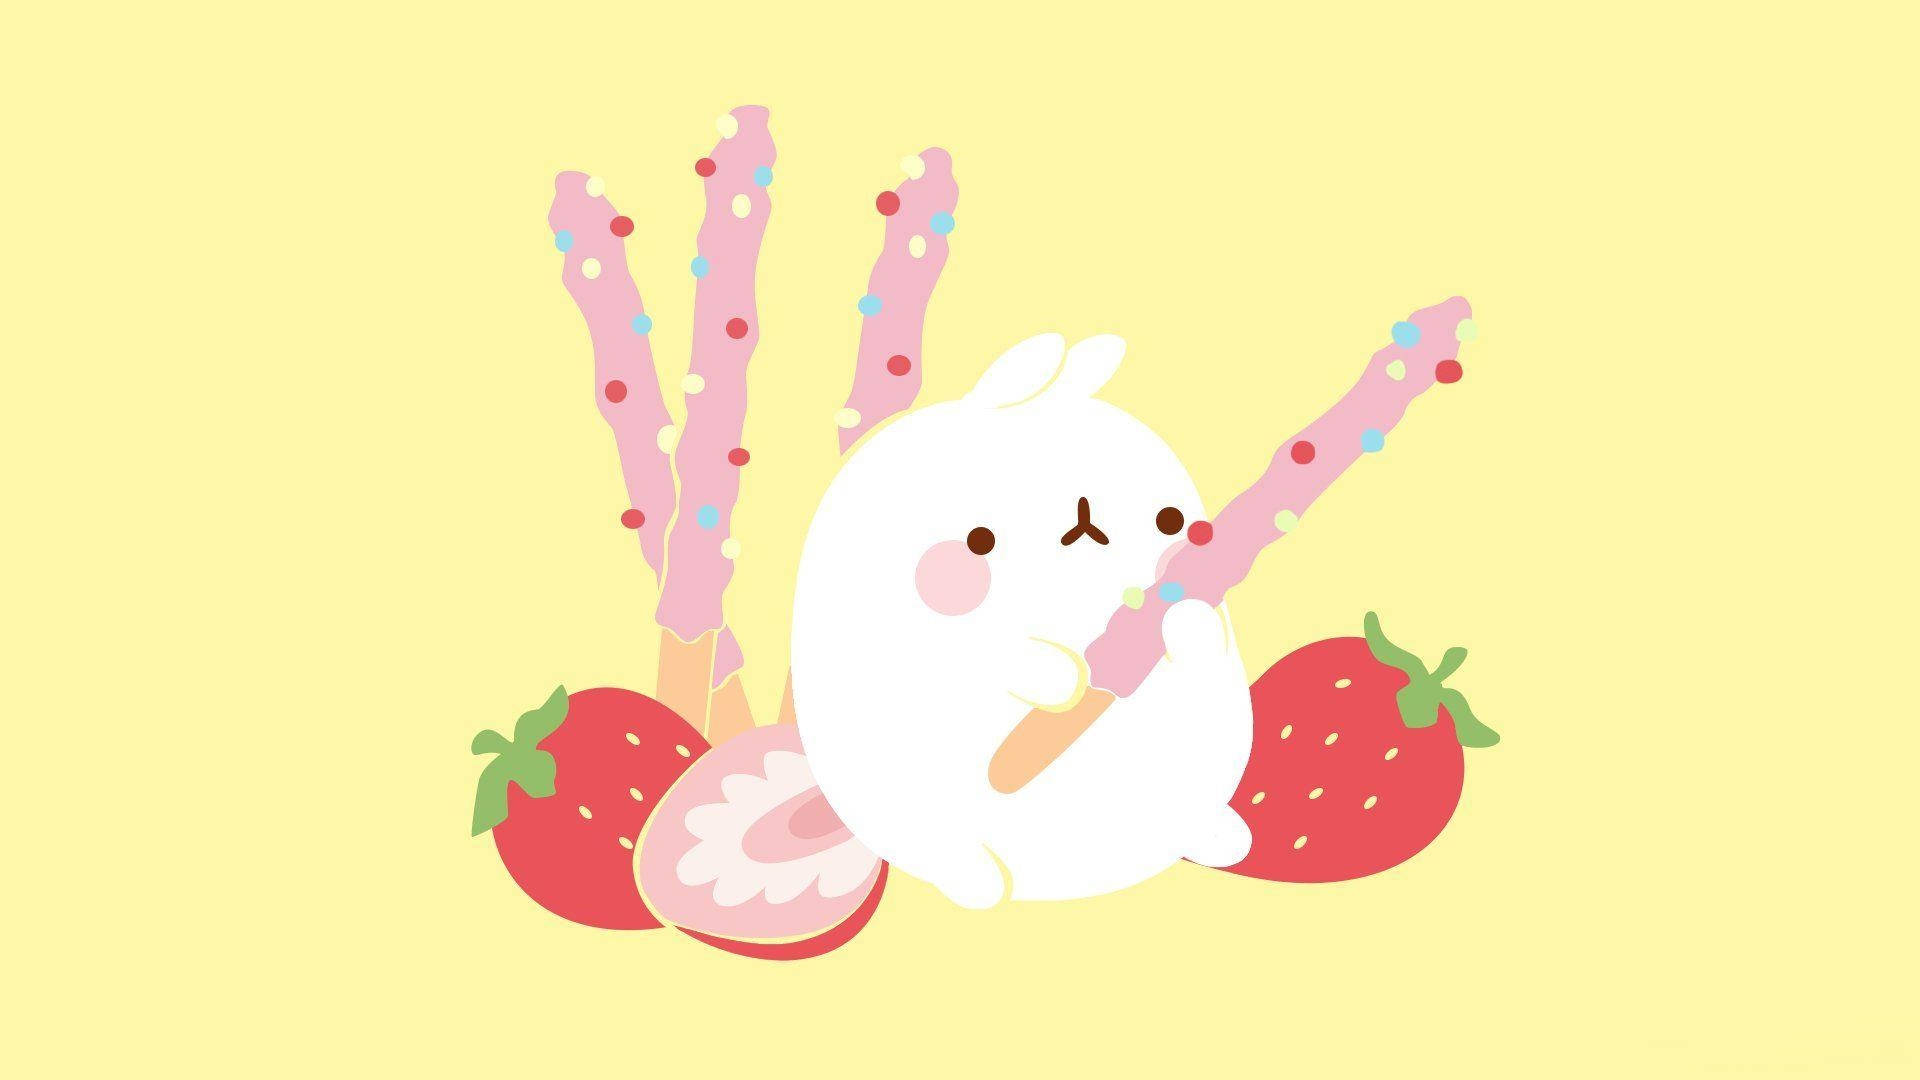 A delicious and oh-so-appealing strawberry treat! Wallpaper